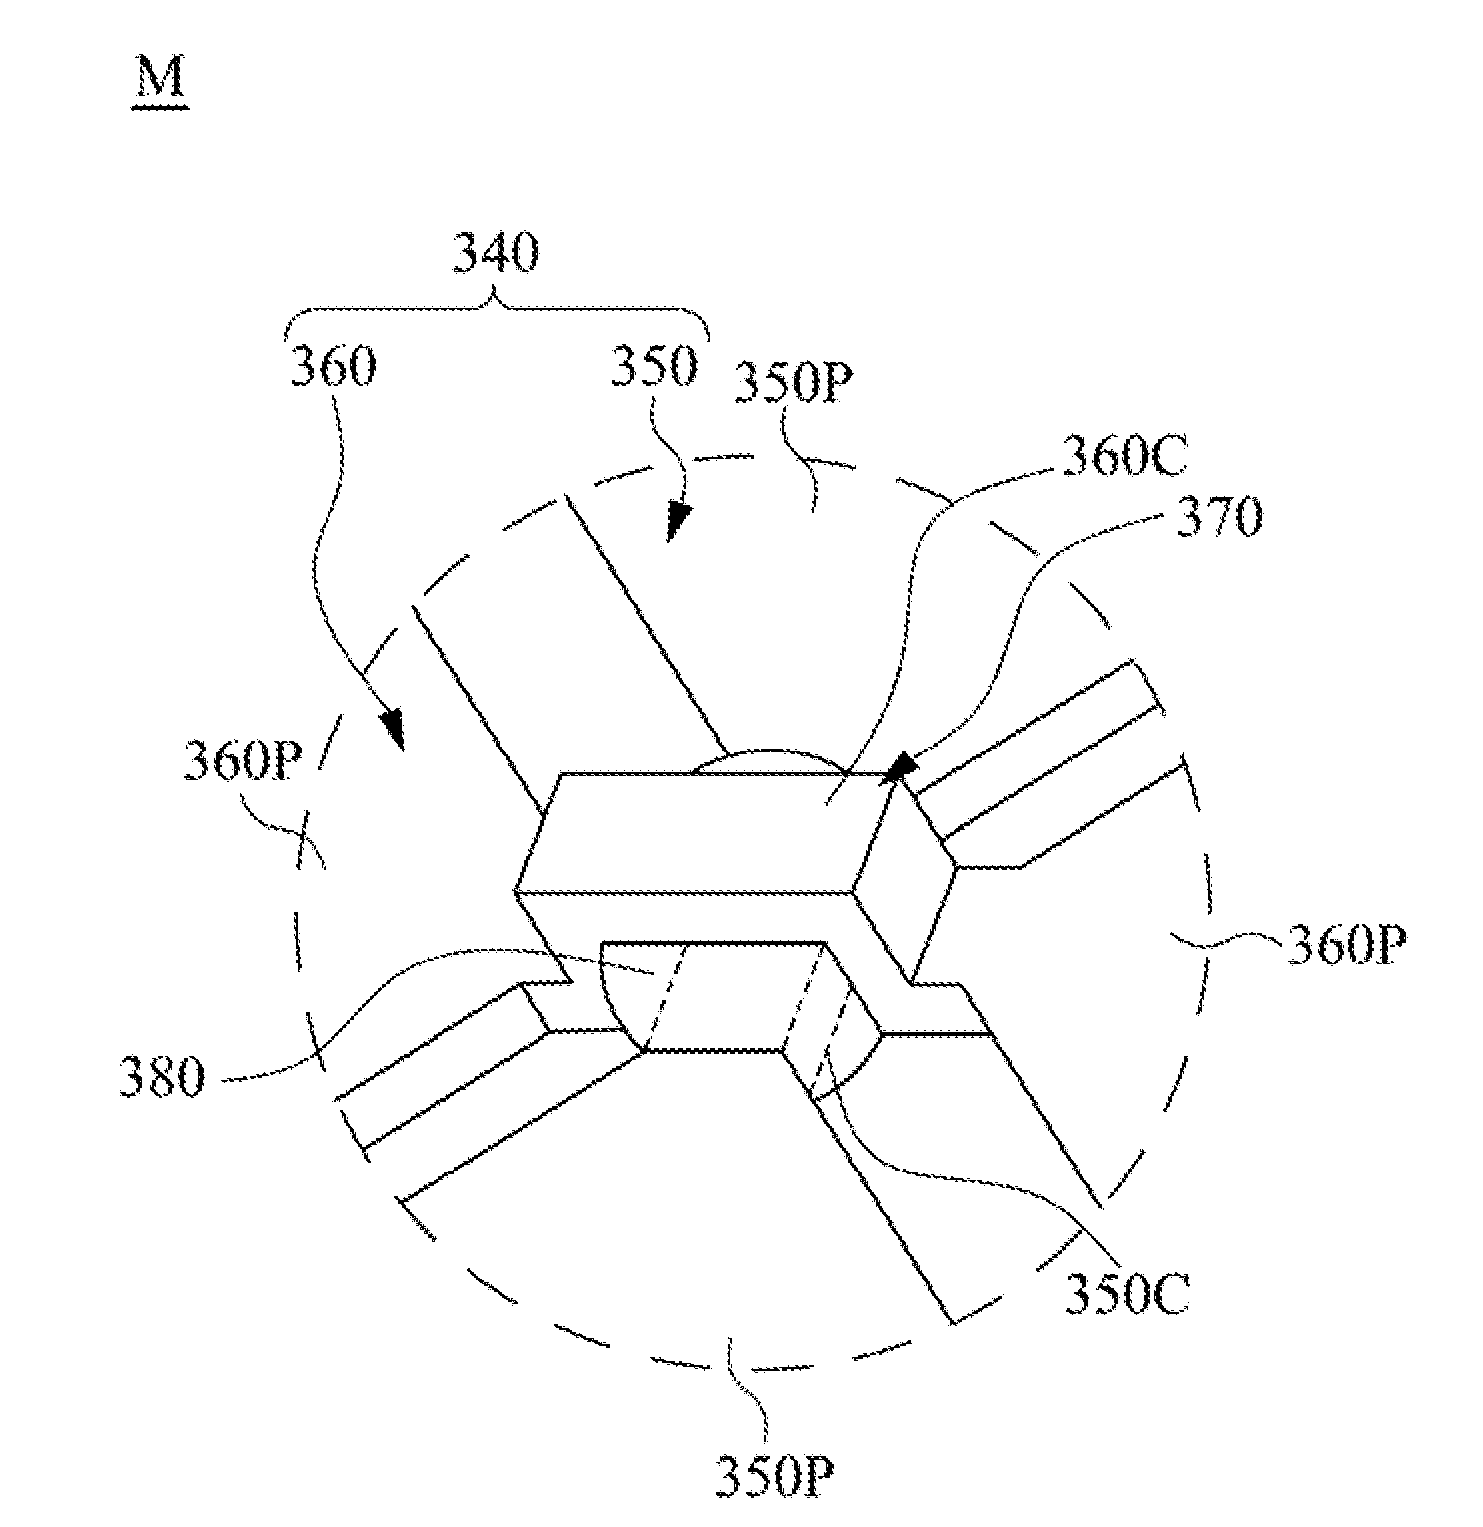 Touch panel and touch-controlled display device